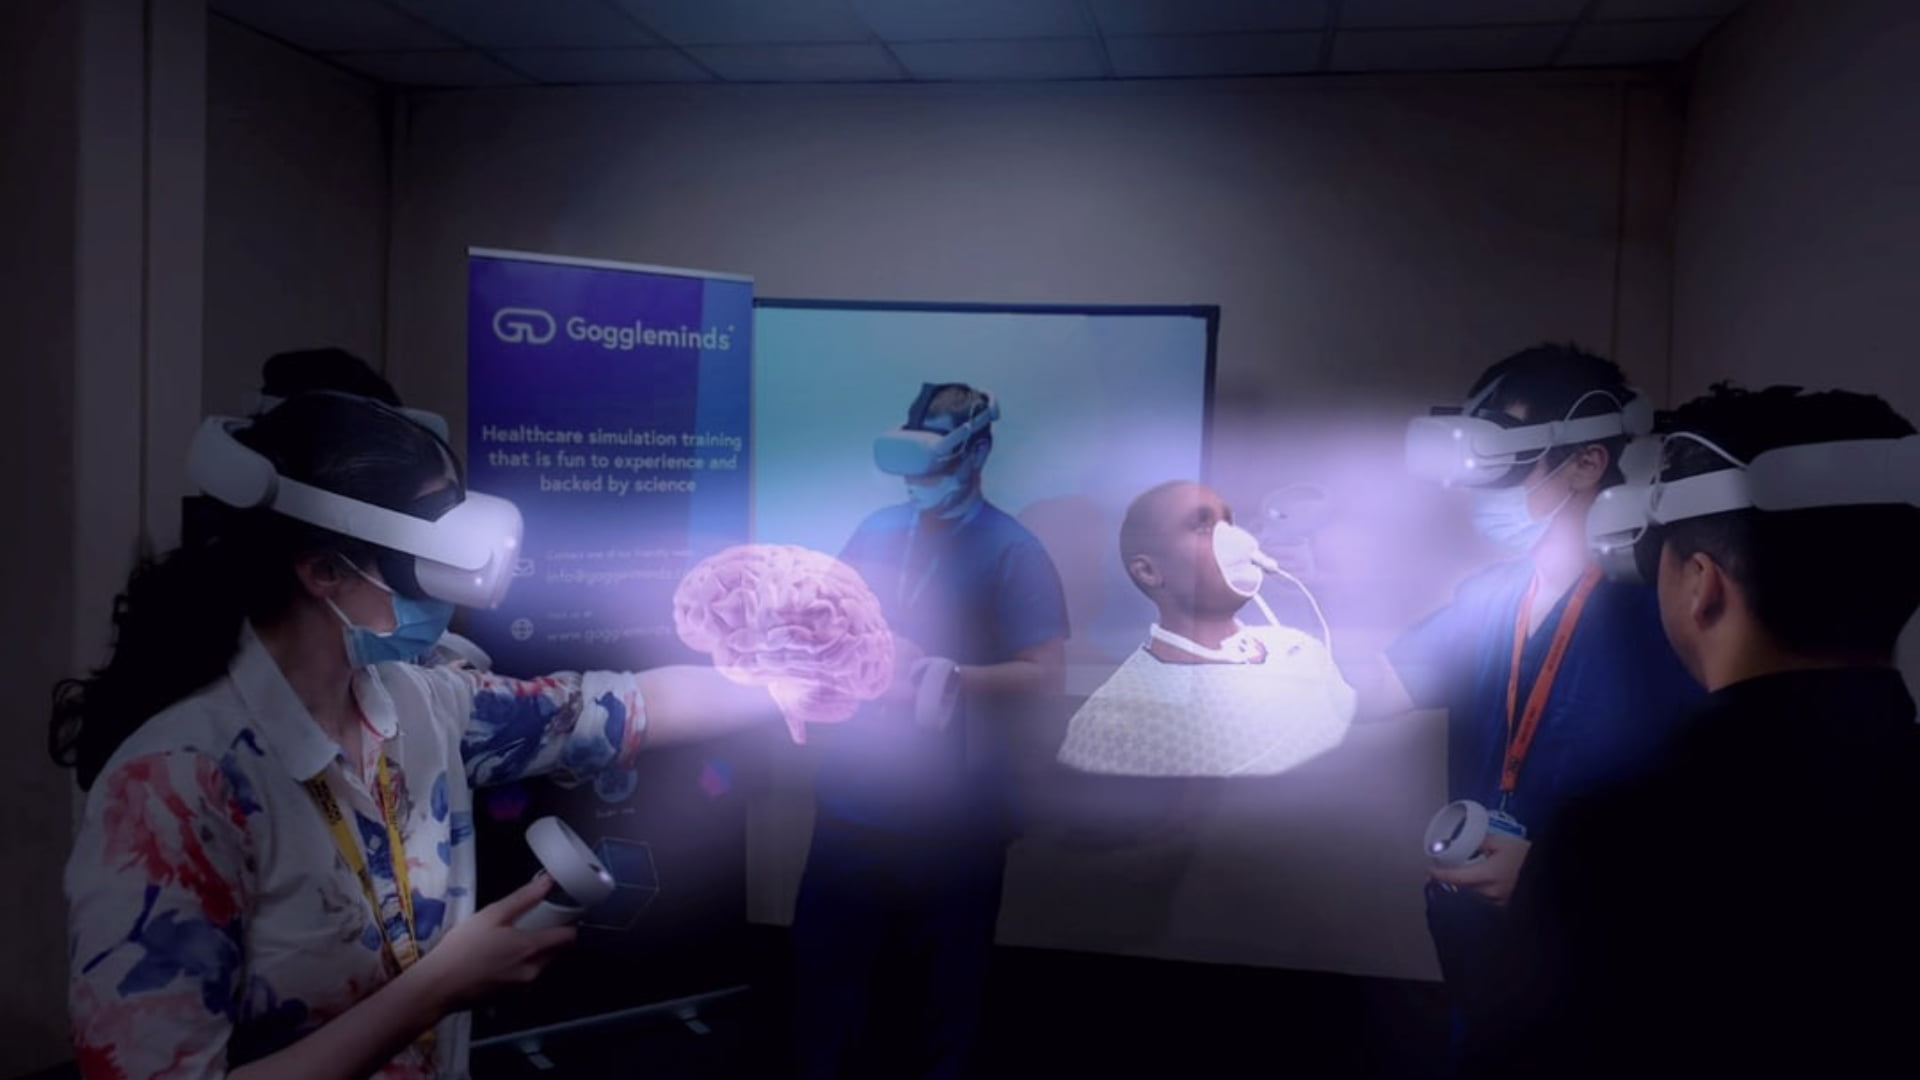 A UK startup develops the "Mediverse" to train healthcare professionals in VR